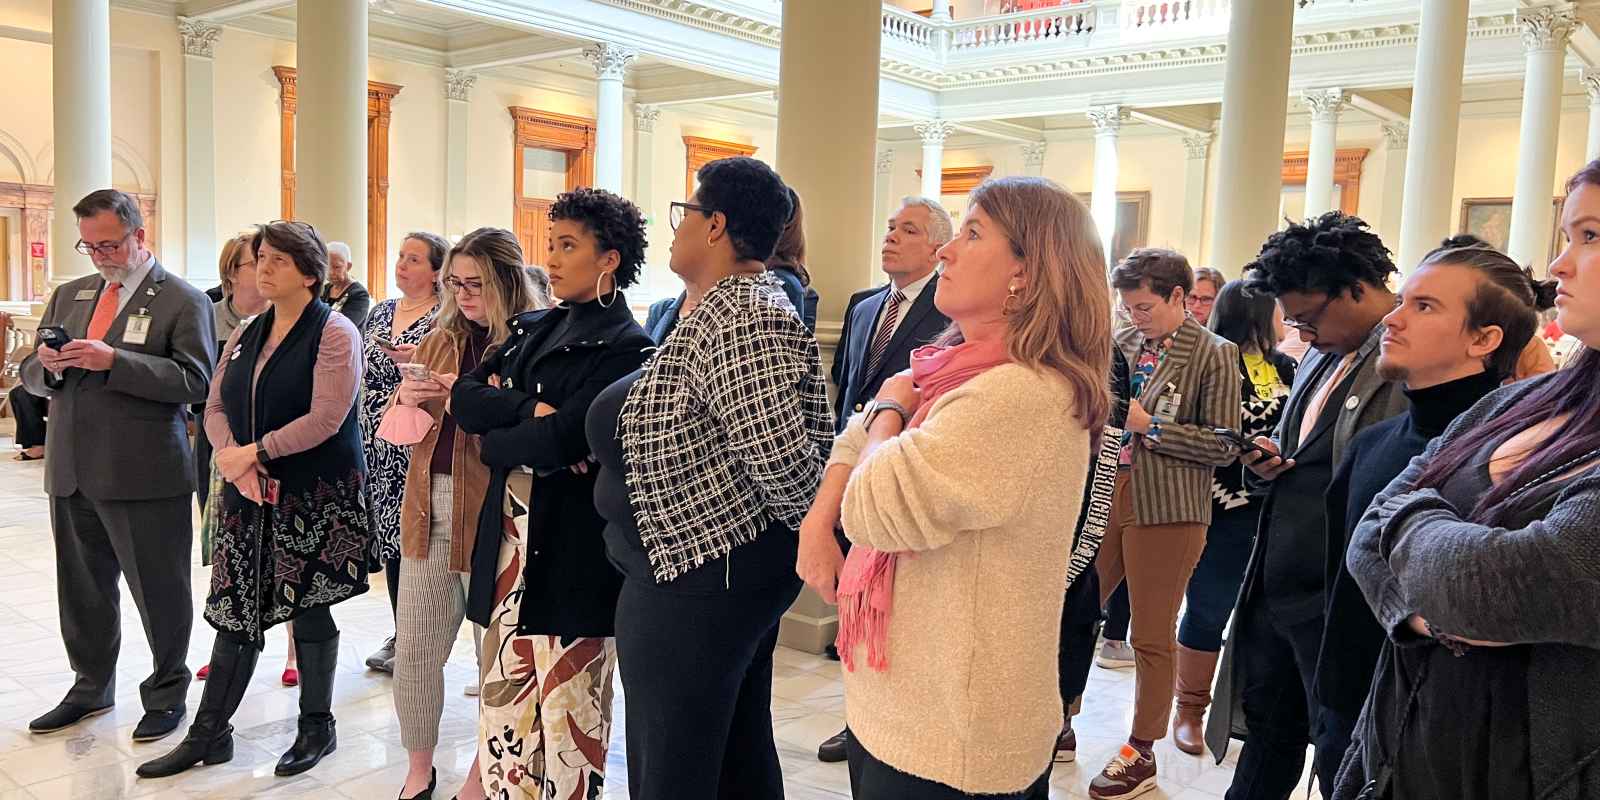 LGBTQ+ allies at the Georgia state capitol reacting to the passage of Senate Bill 140 on March 21, 2023